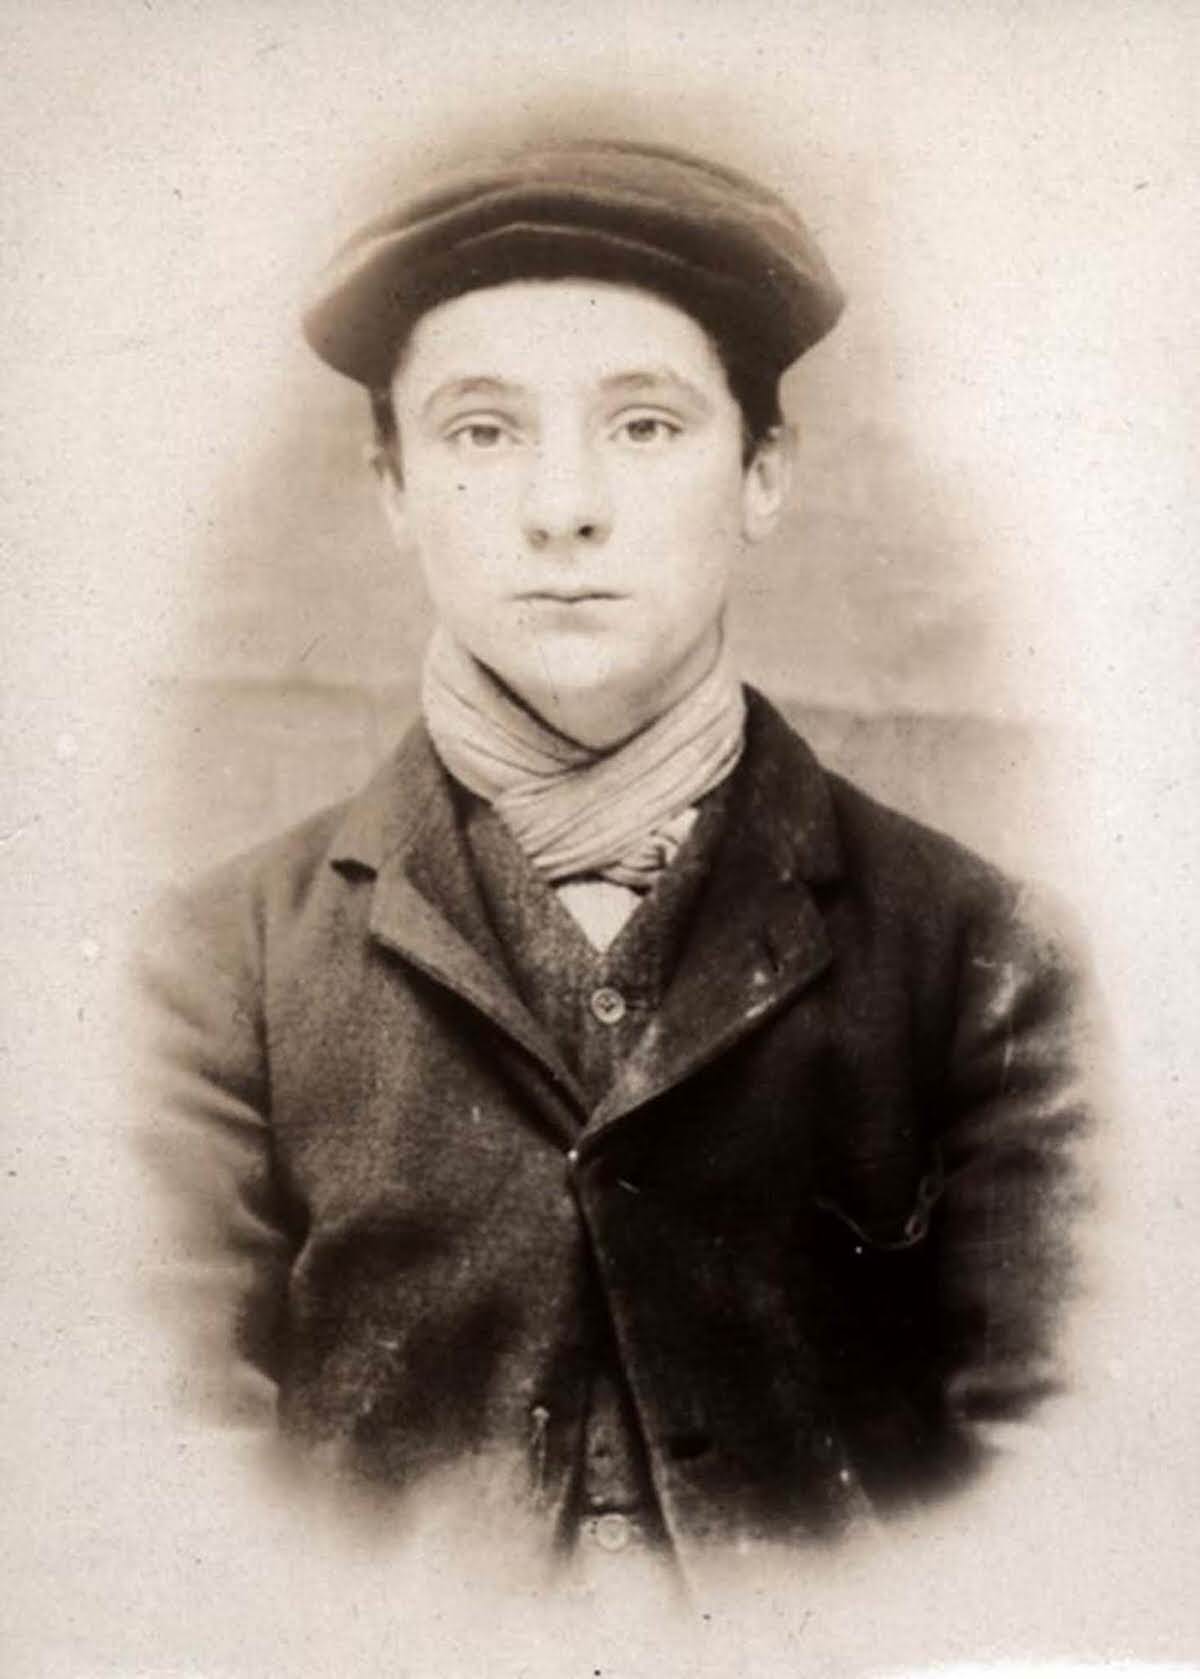 Thomas Pearson, 16, arrested for thefts from backyards, 1907.